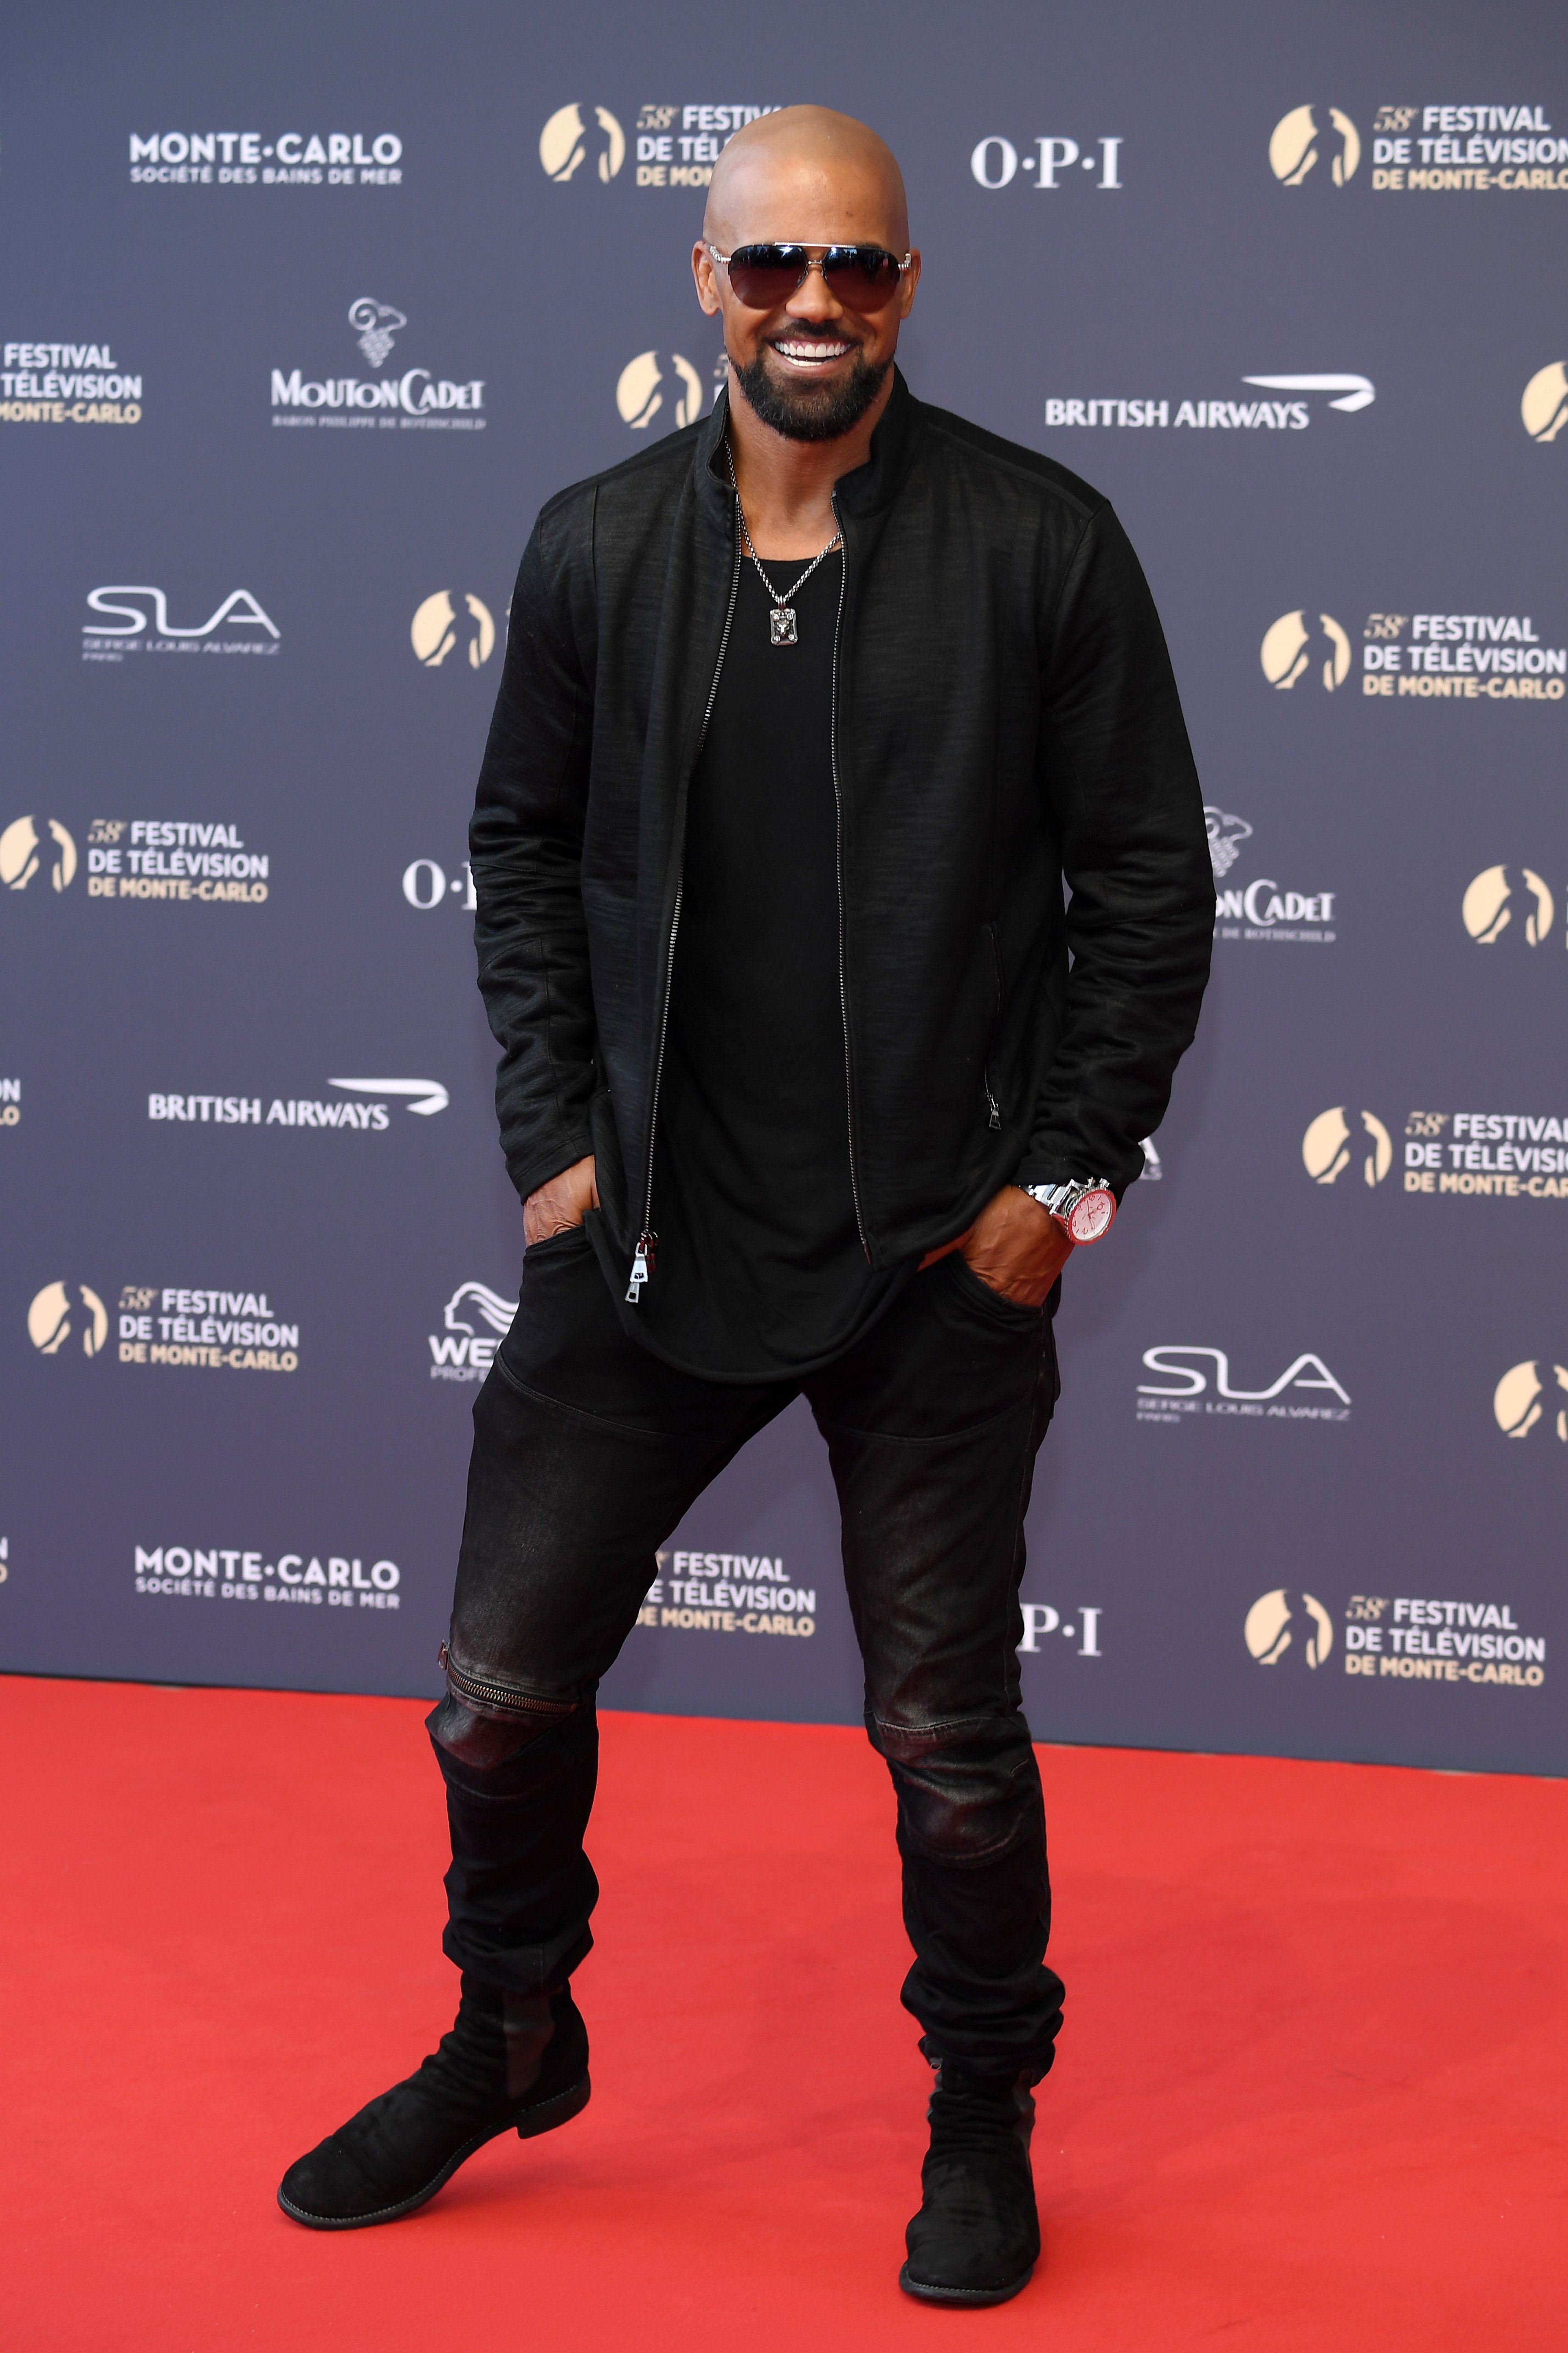 Shemar Moore on June 15, 2018 in Monte-Carlo, Monaco | Source: Getty Images